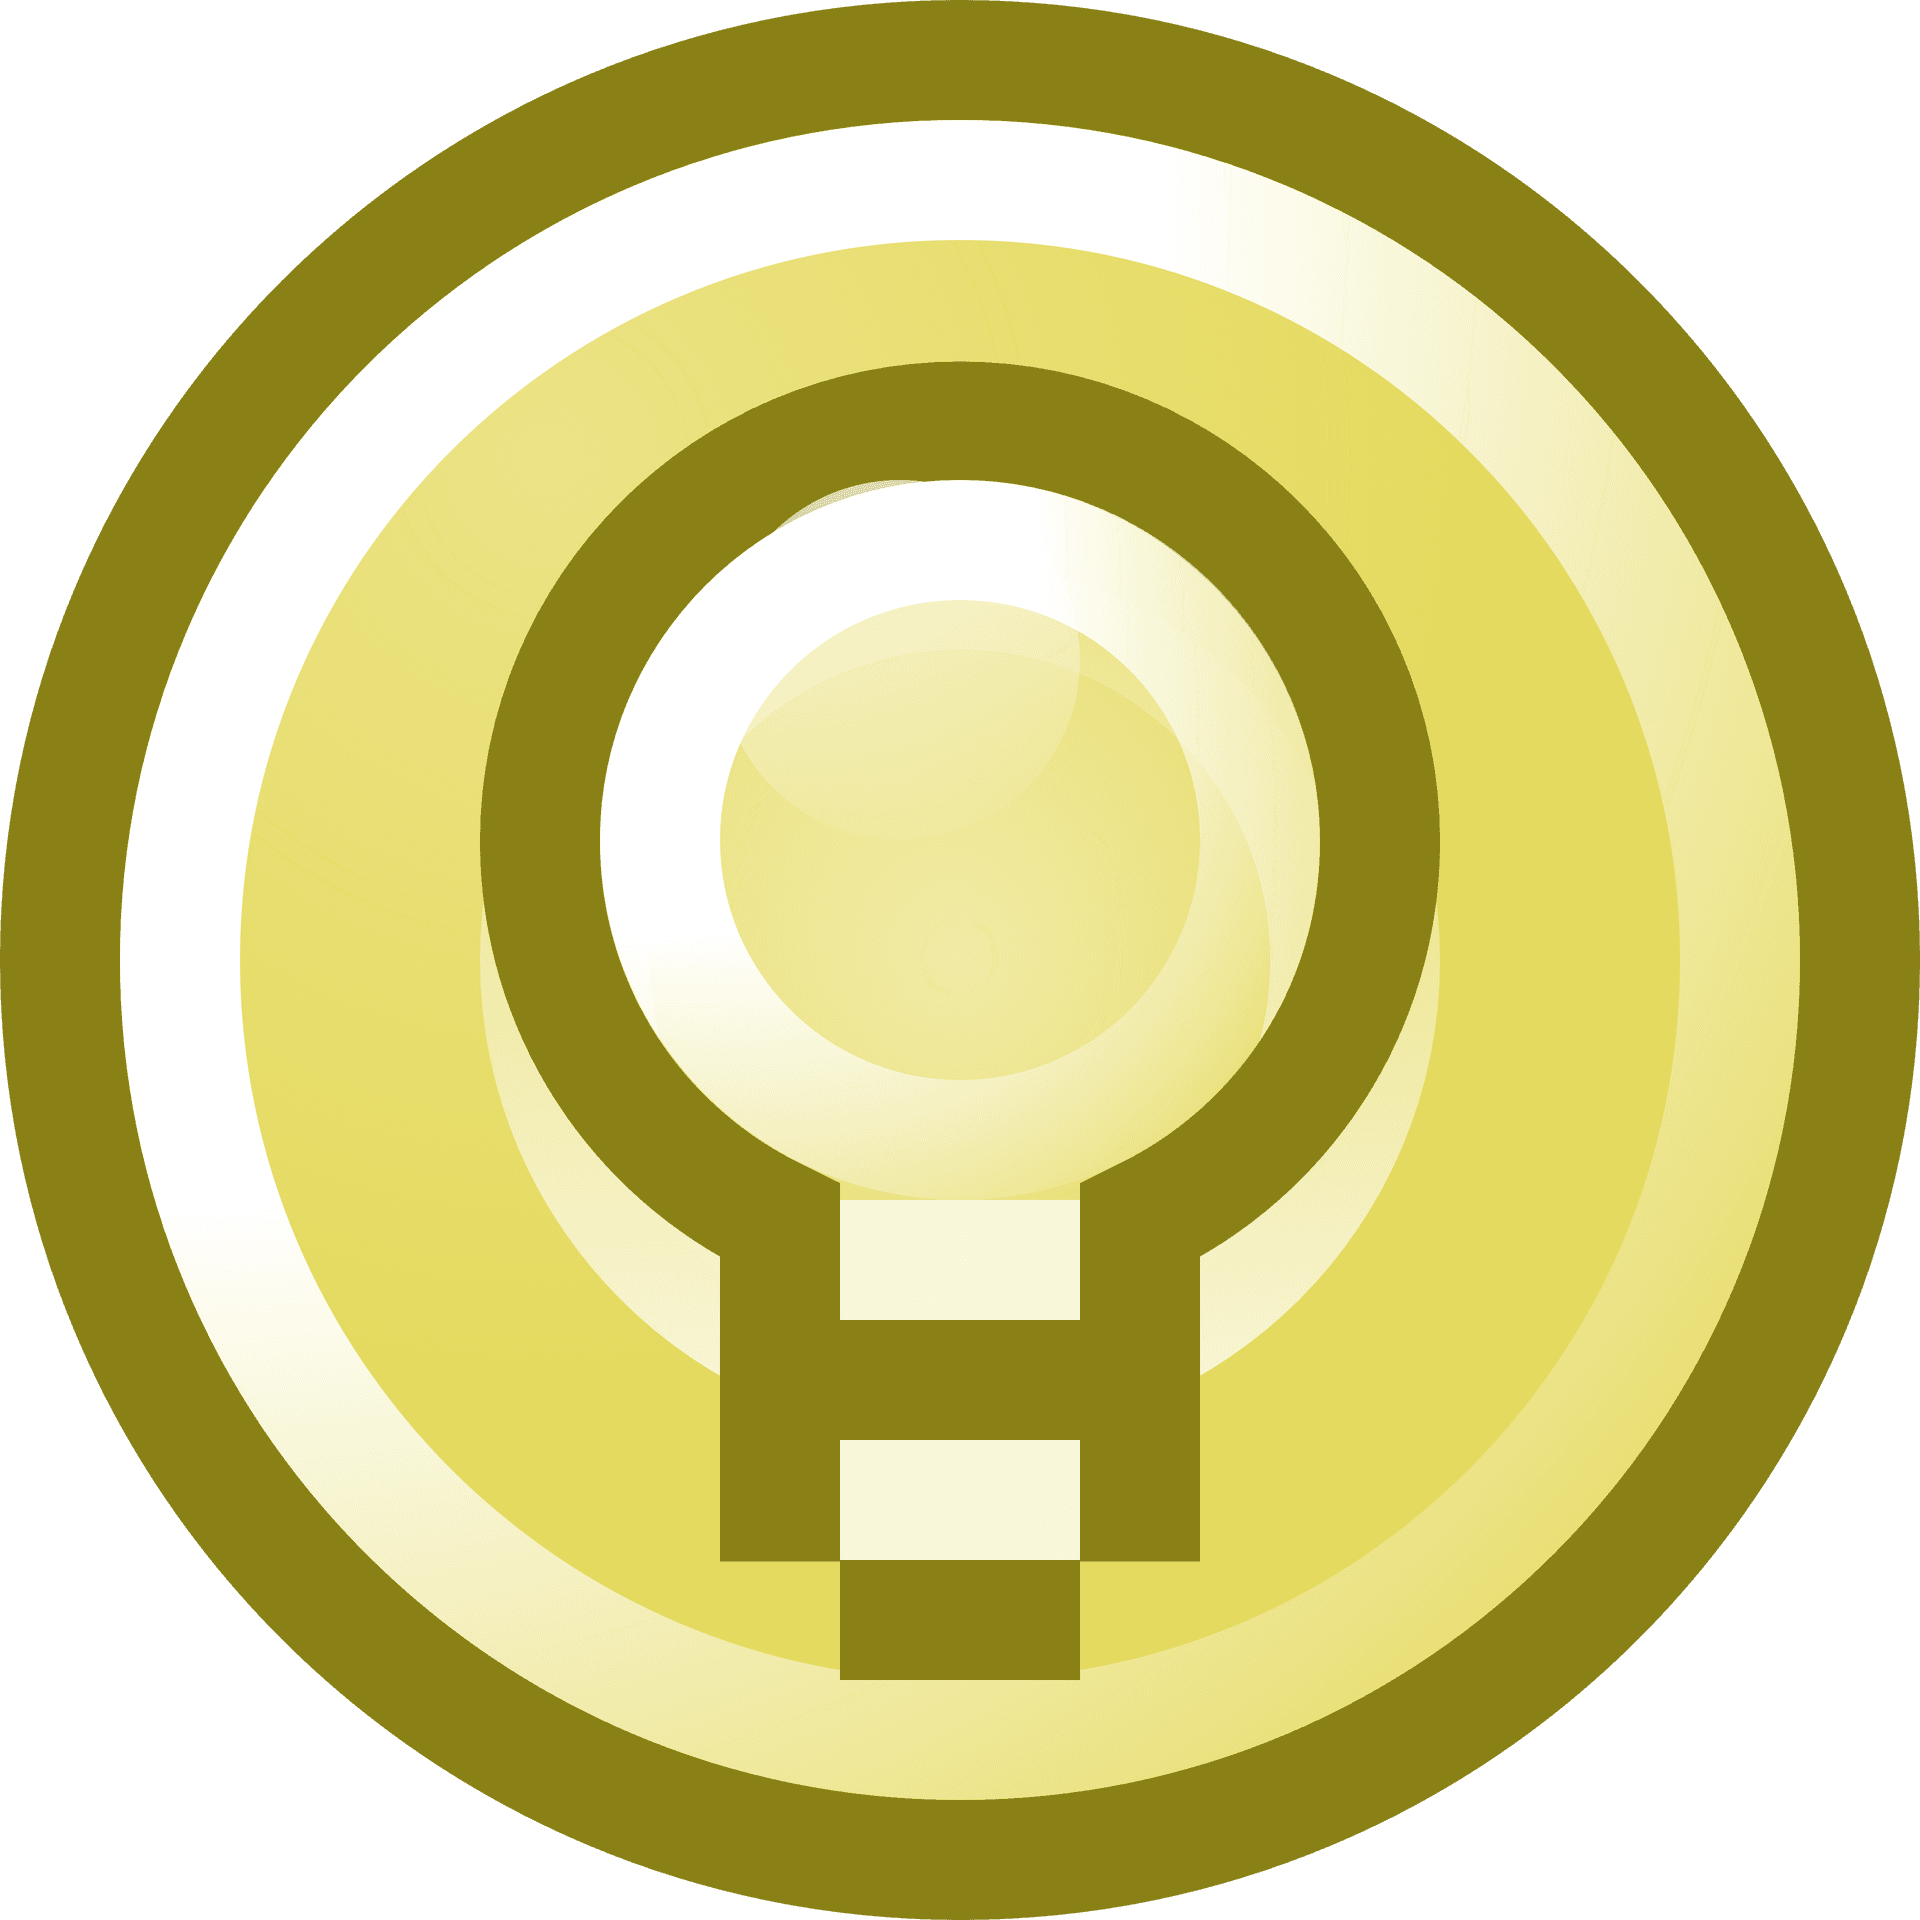 Abstract Lightbulb Graphic SVG